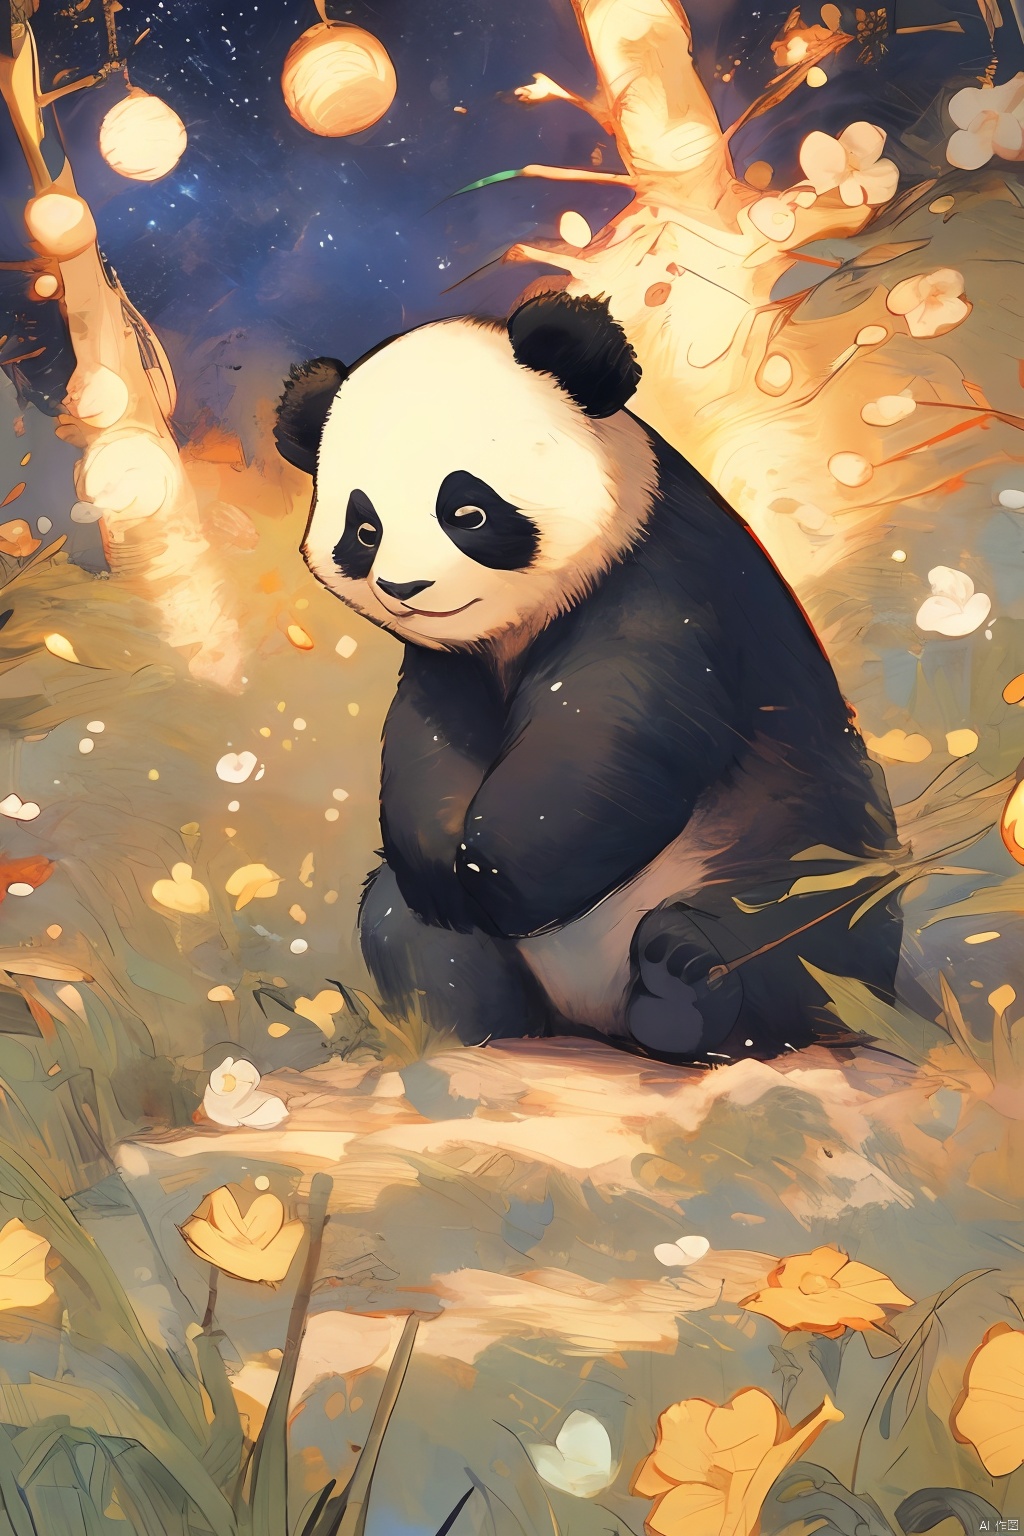 A panda under a starry sky, in the style of painter Vincent Van Gogh, vibrant illustrations, cute, healing, fangao, MG xiongmao